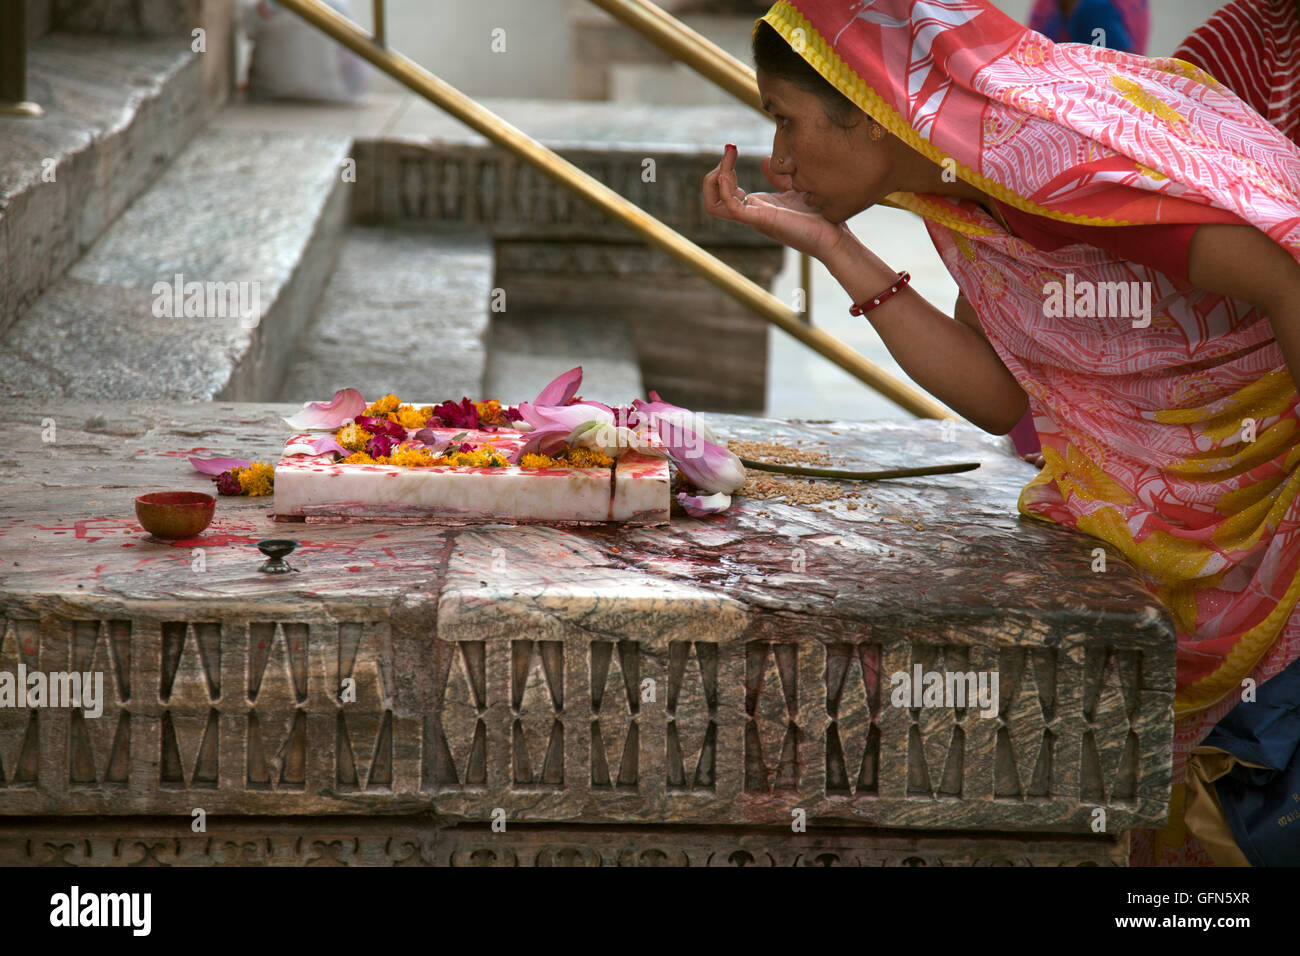 A Hindu woman marks her forhead with a Tilaka or tika in Hindi at the Jagdis Temple in Udaipur, Rajistan, India. Stock Photo